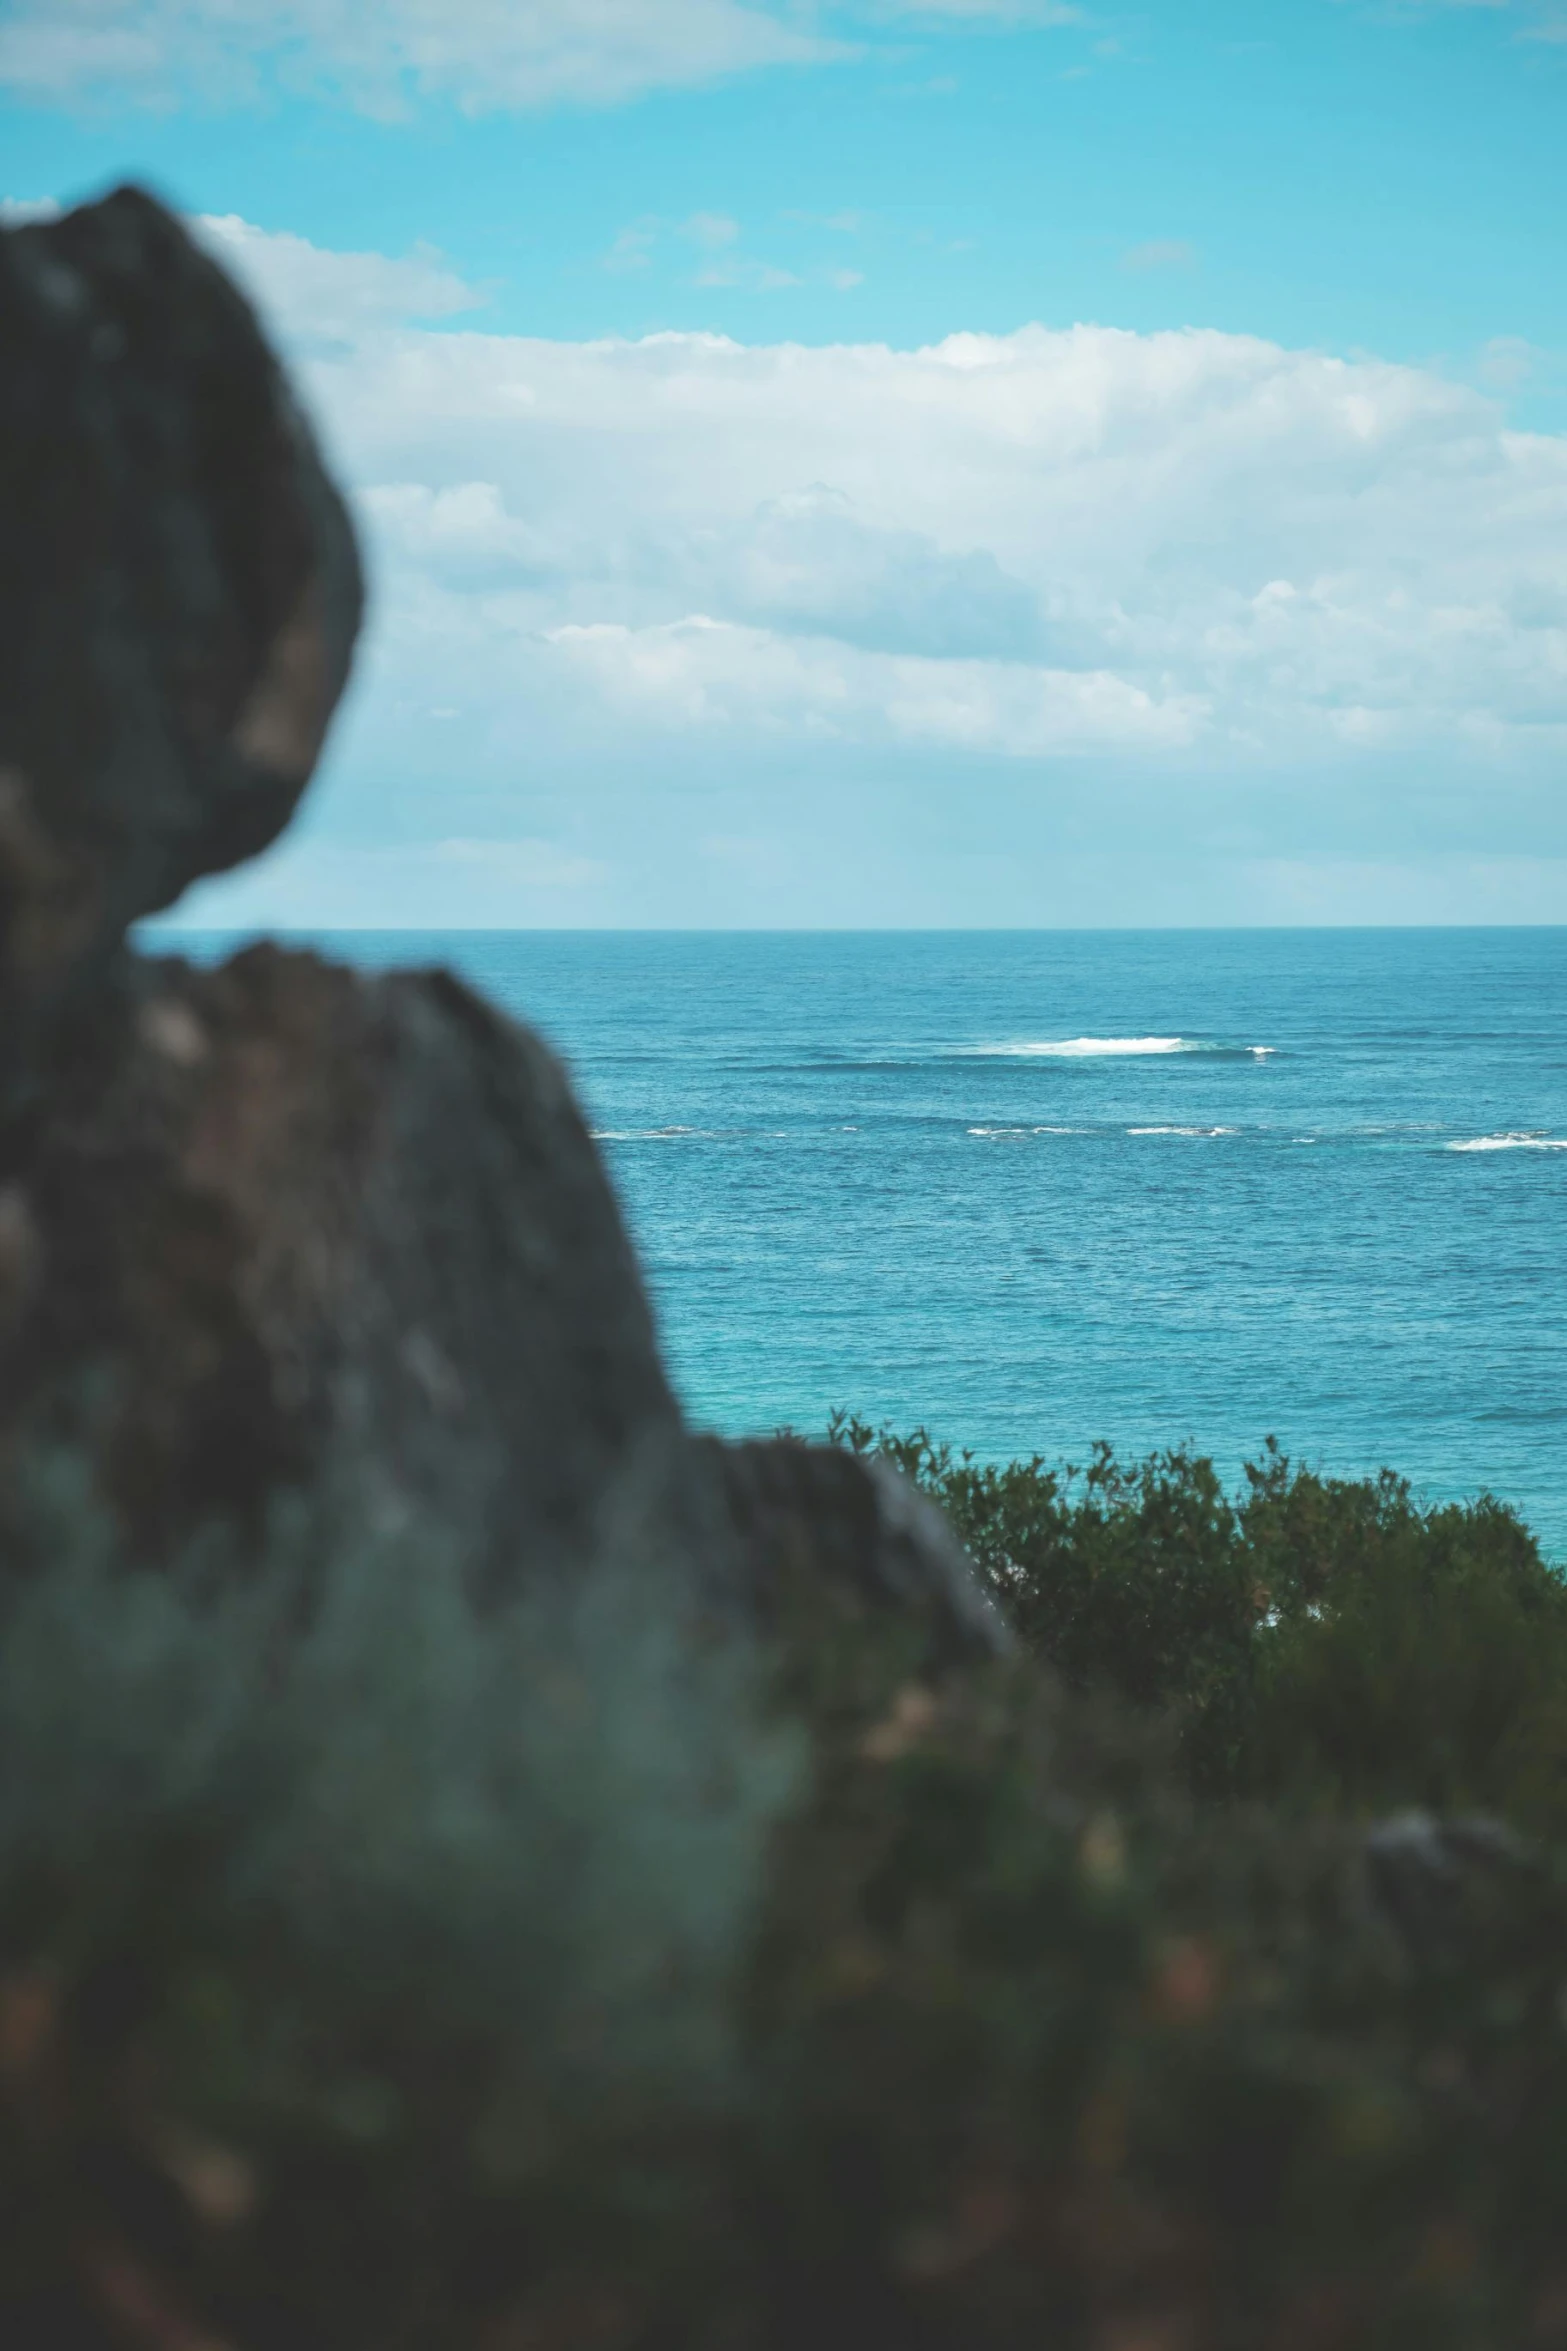 a view of the ocean from the top of a hill, surfing, rocky foreground, shot from a distance, bushes in the foreground